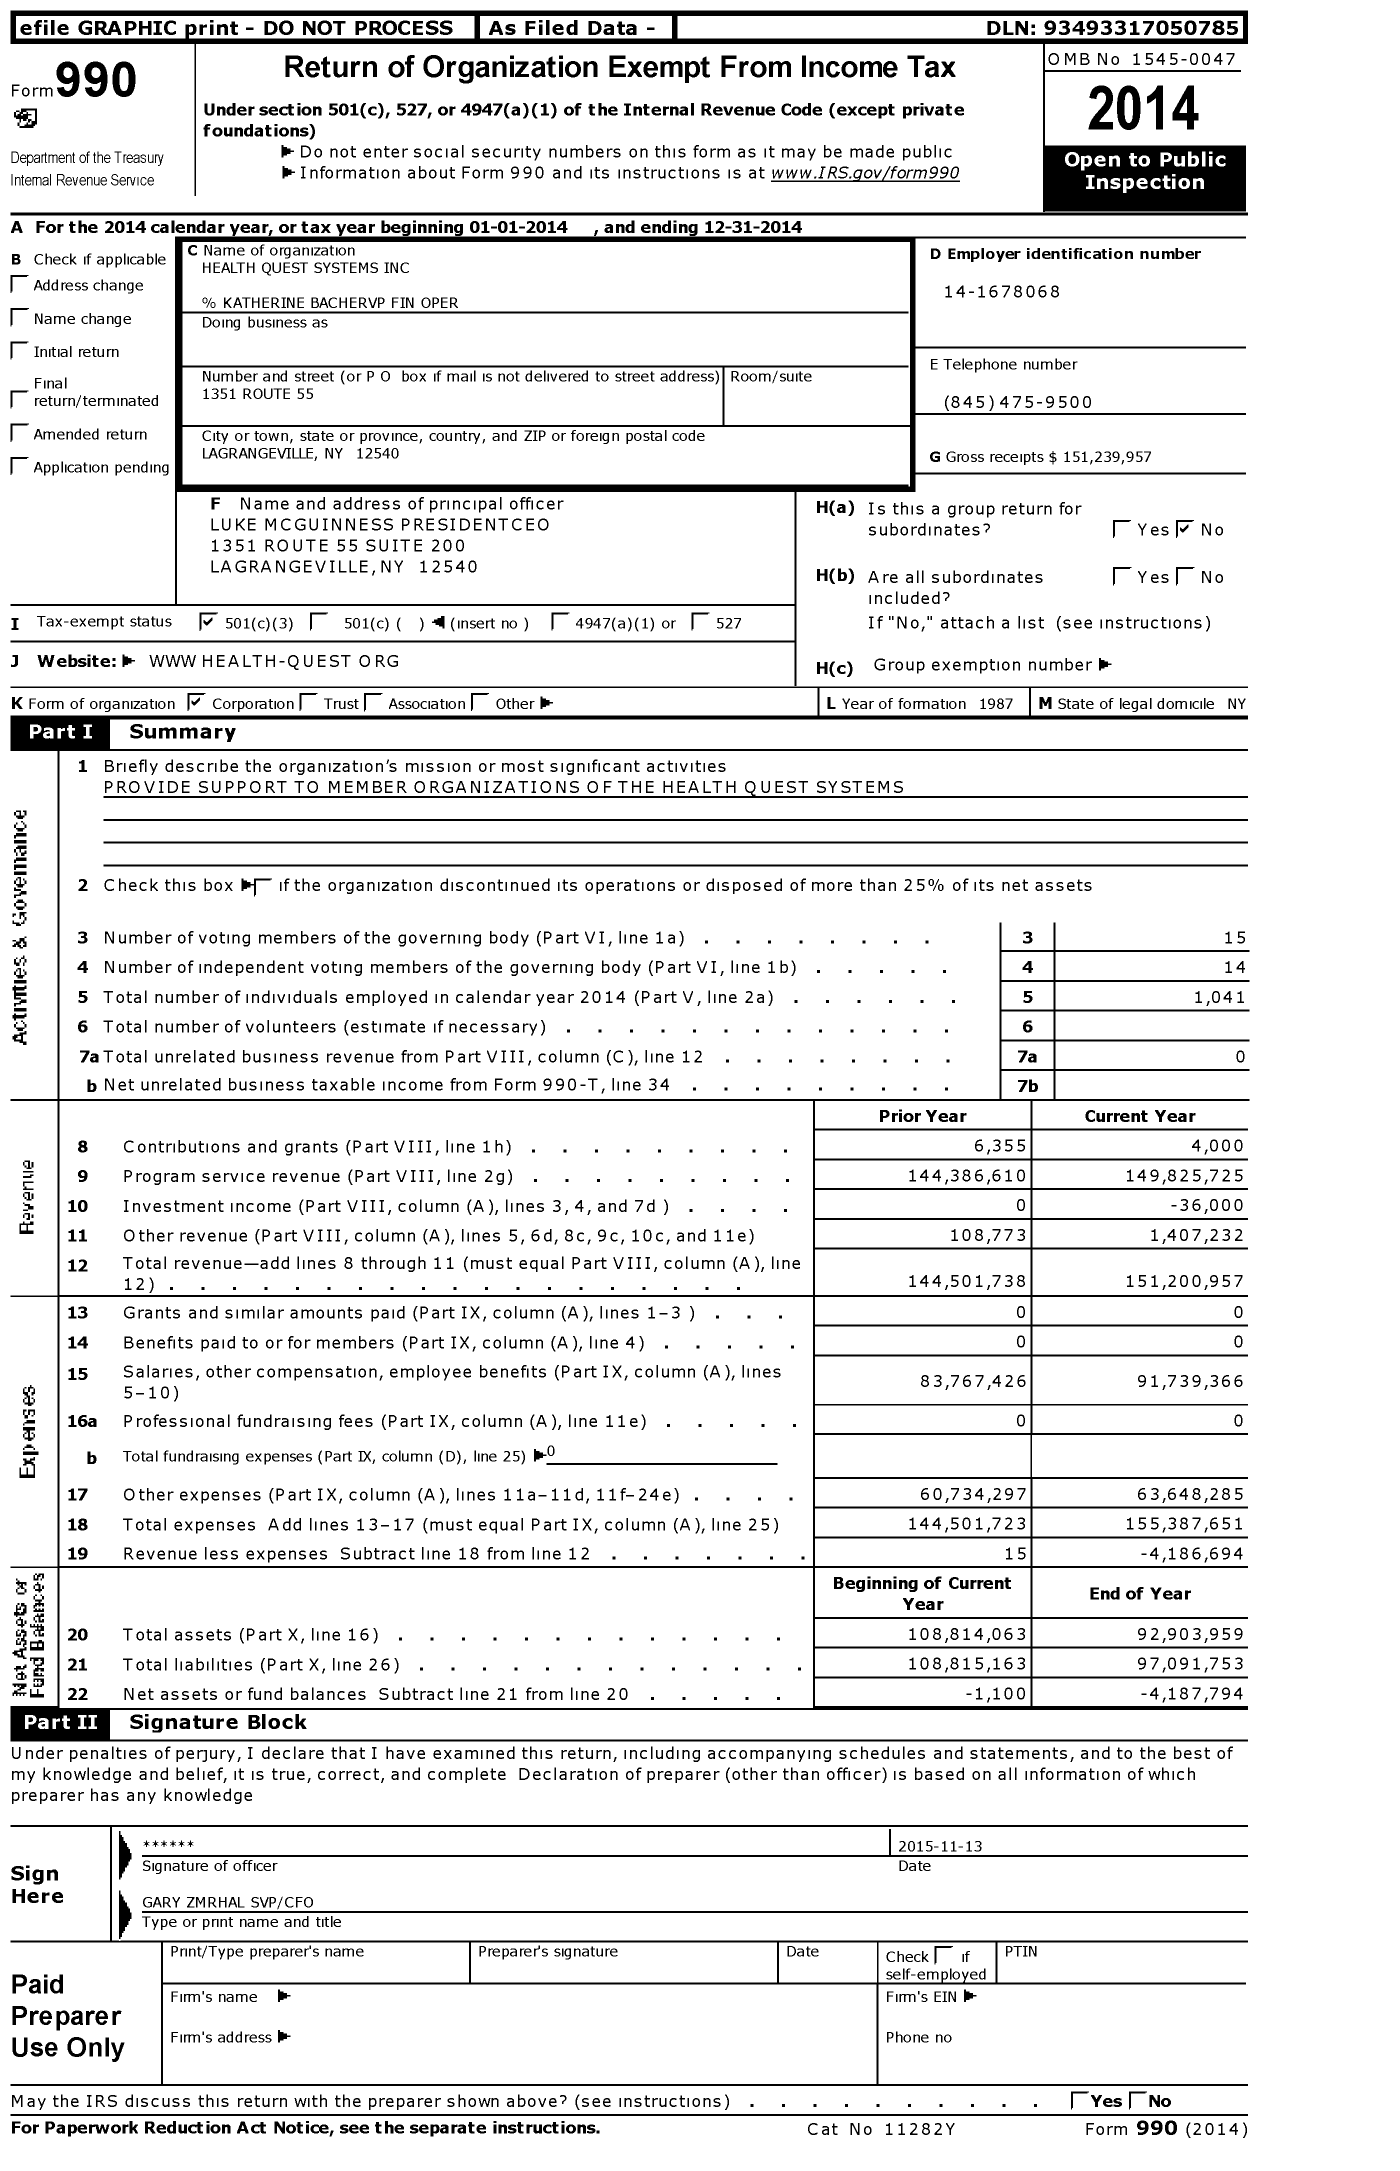 Image of first page of 2014 Form 990 for Health Quest Systems